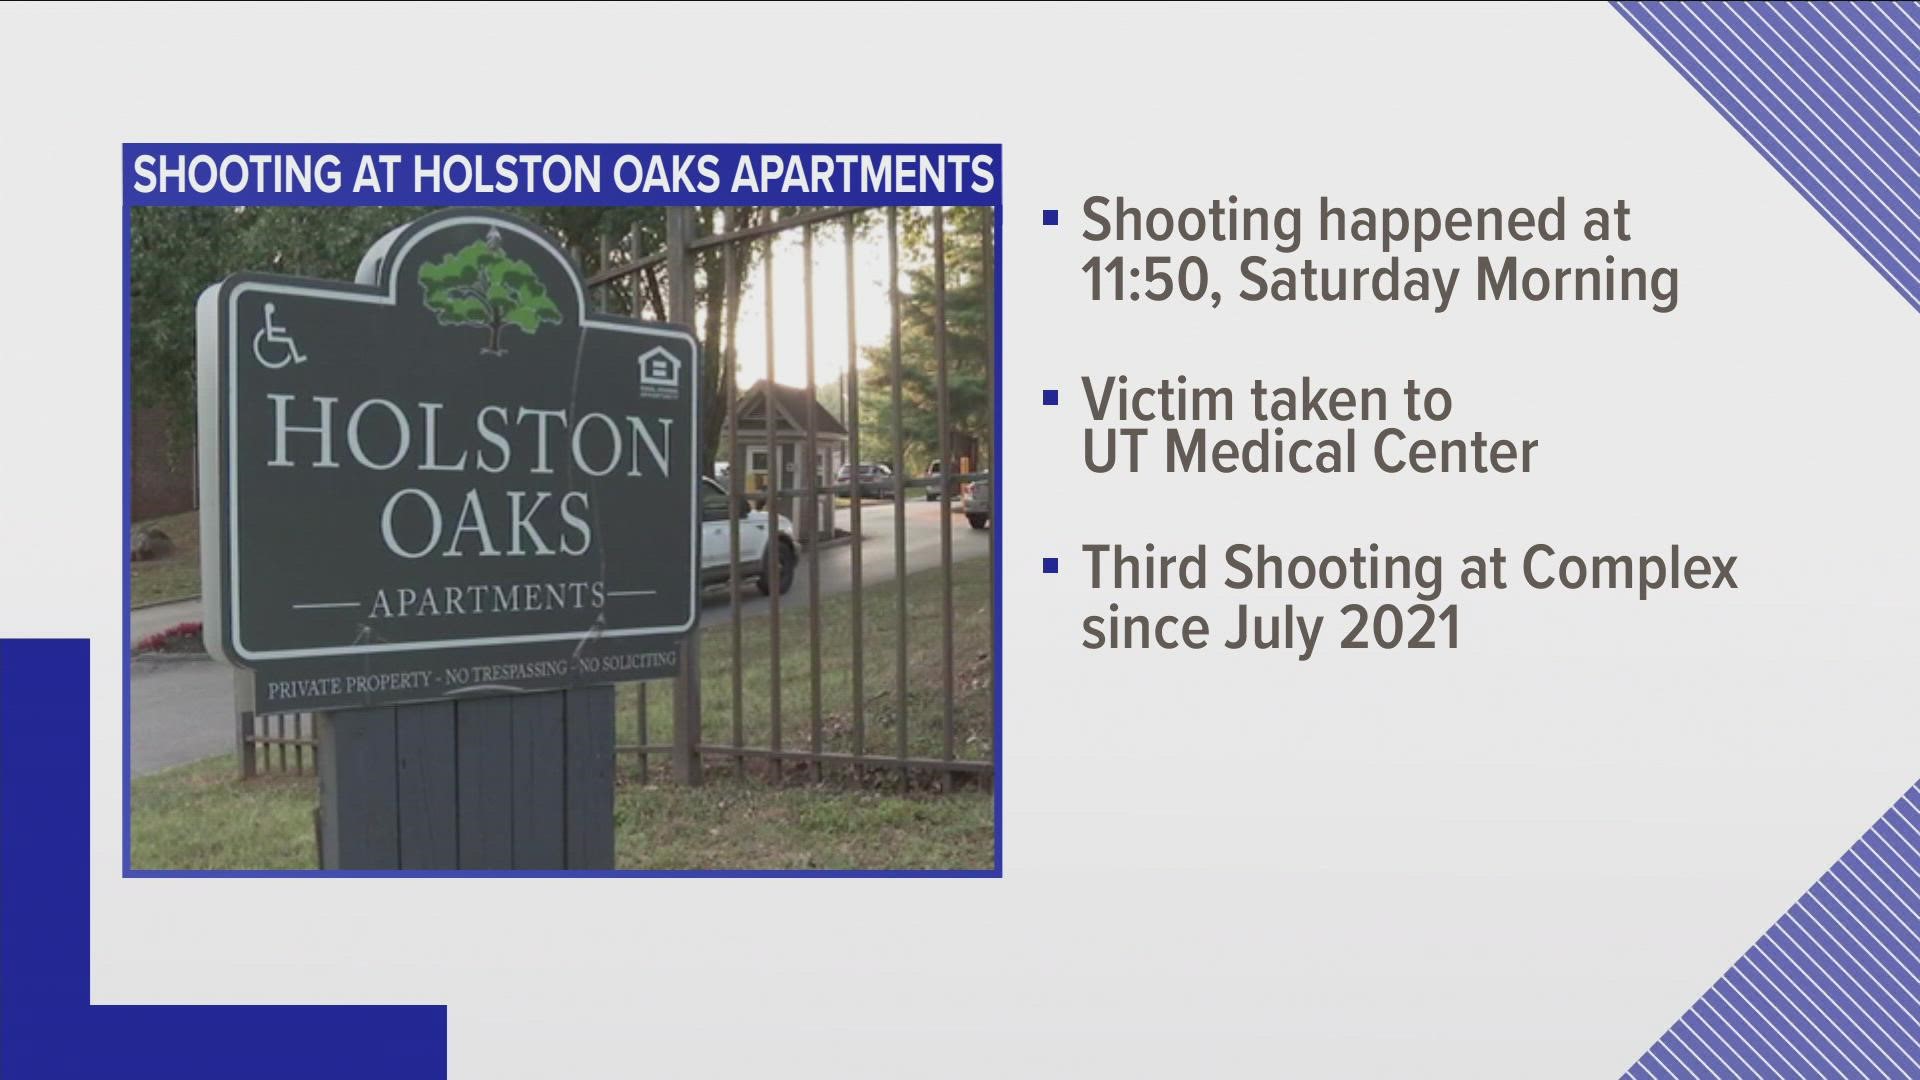 According to reports, several shootings have been reported in the past at the apartment complex.